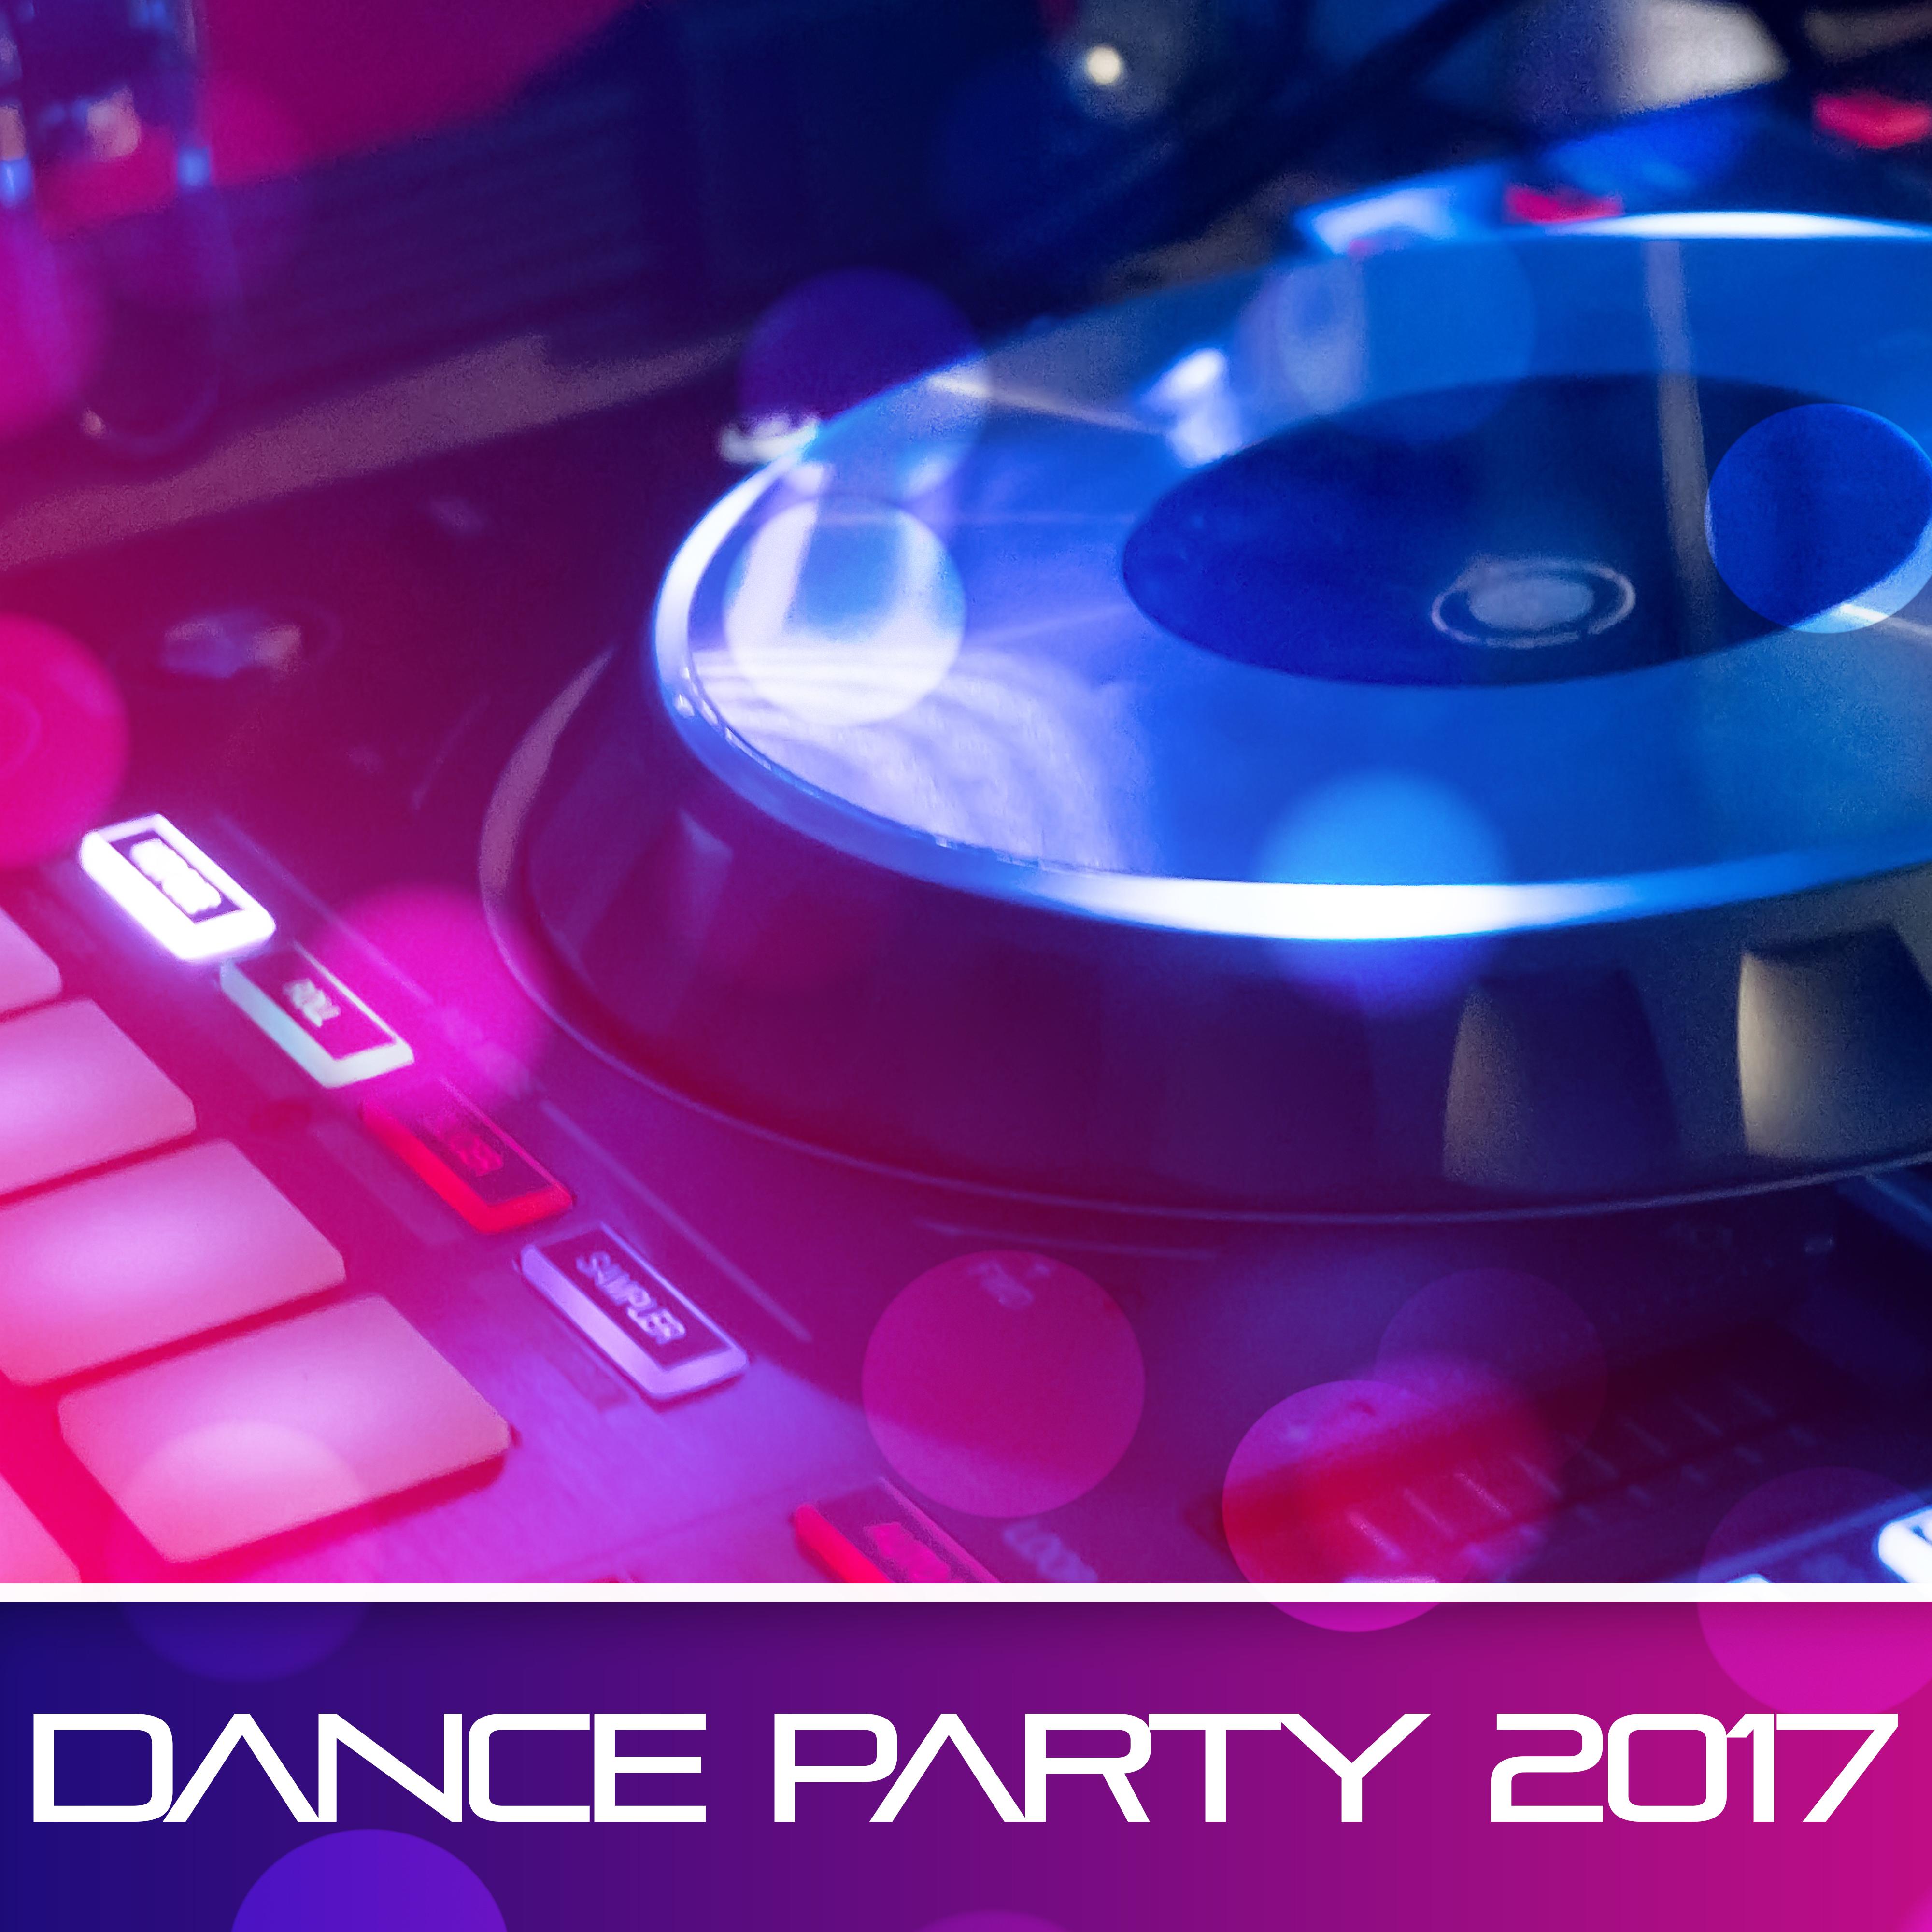 Dance Party 2017– Sexy Chilliout,  Beats, Deep Chillout Lounge, Relax, Chill Out 2017